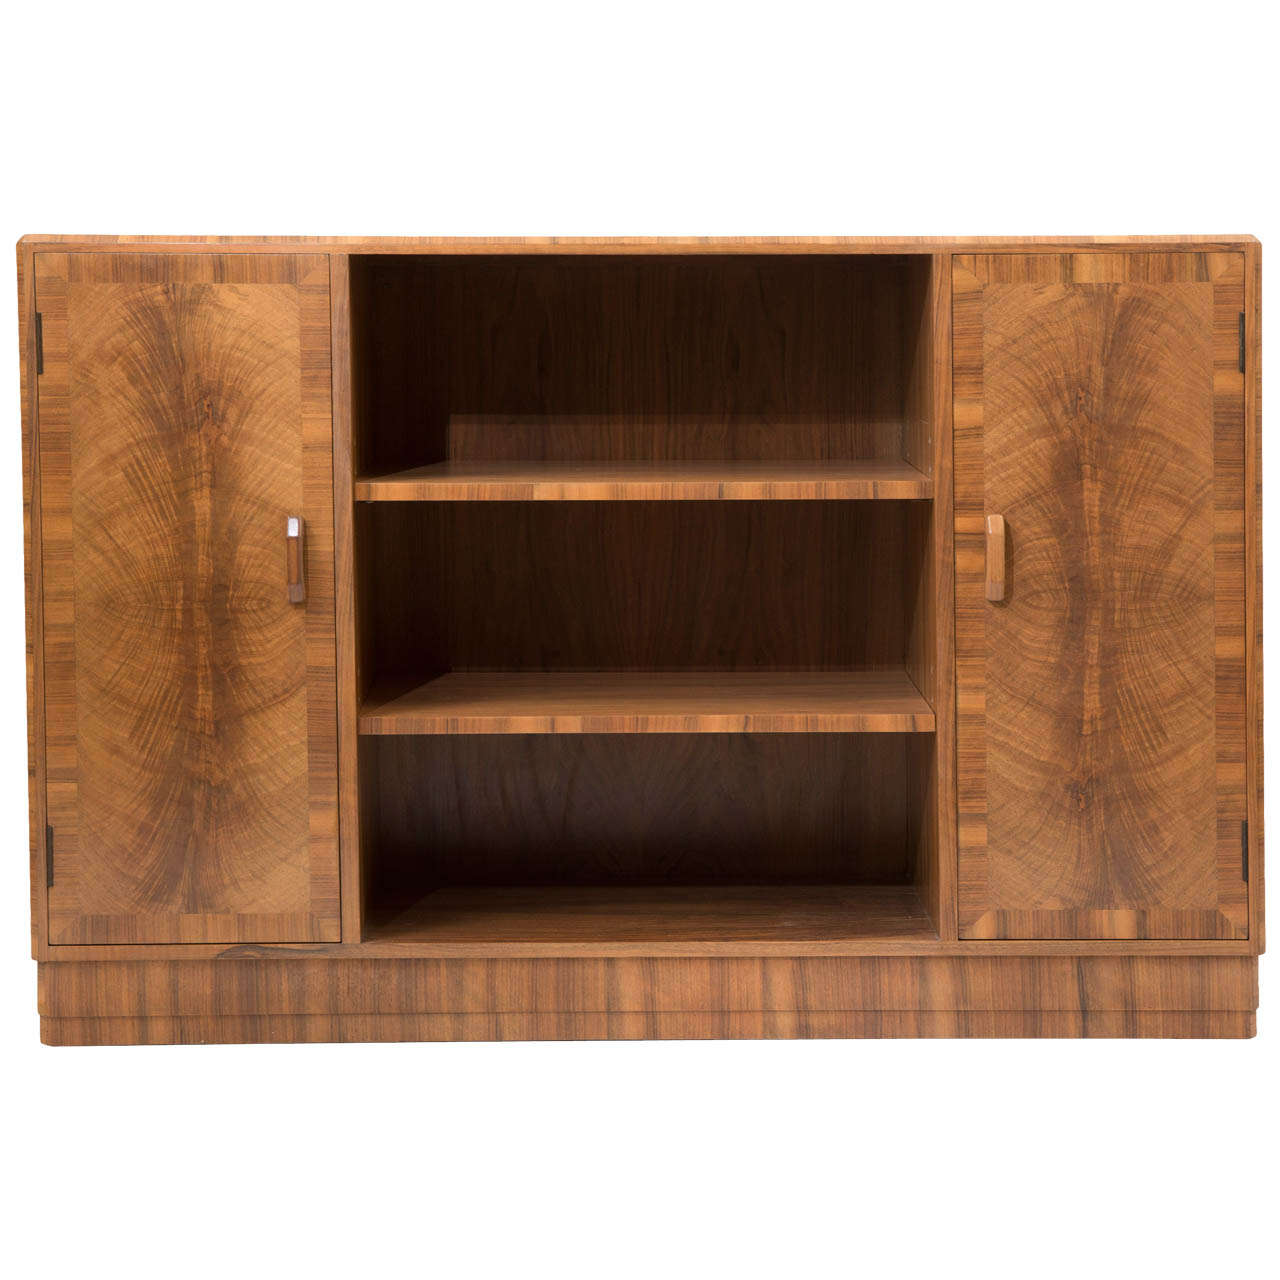 A Walnut Bookcase by Heals of London